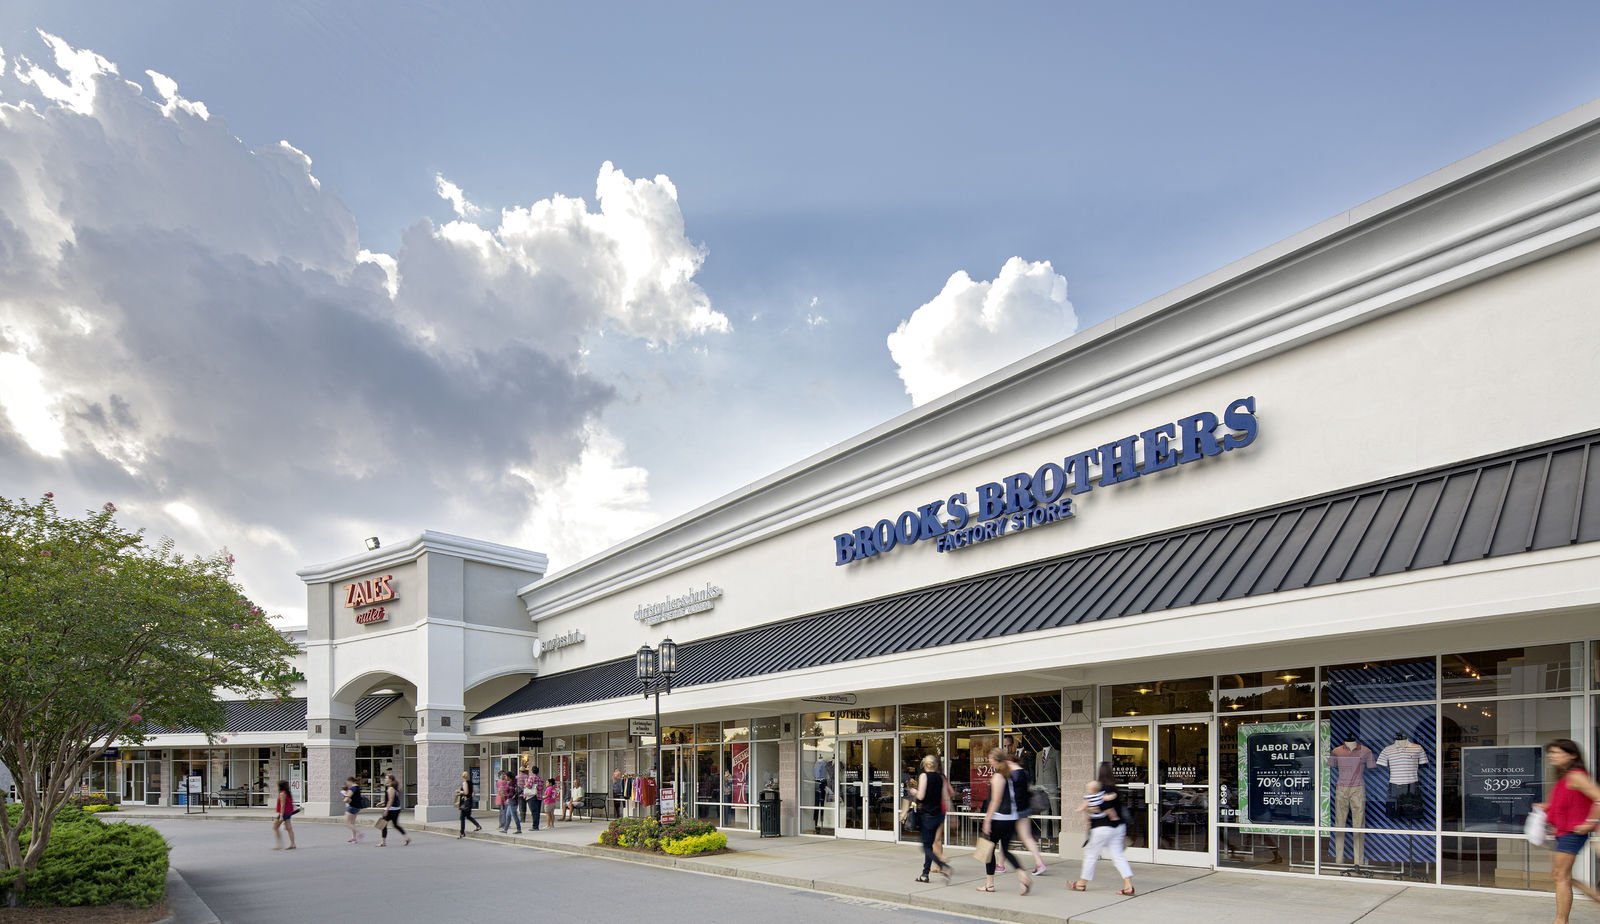 Carolina Premium Outlets - Outlet mall in North Carolina. Location & hours.